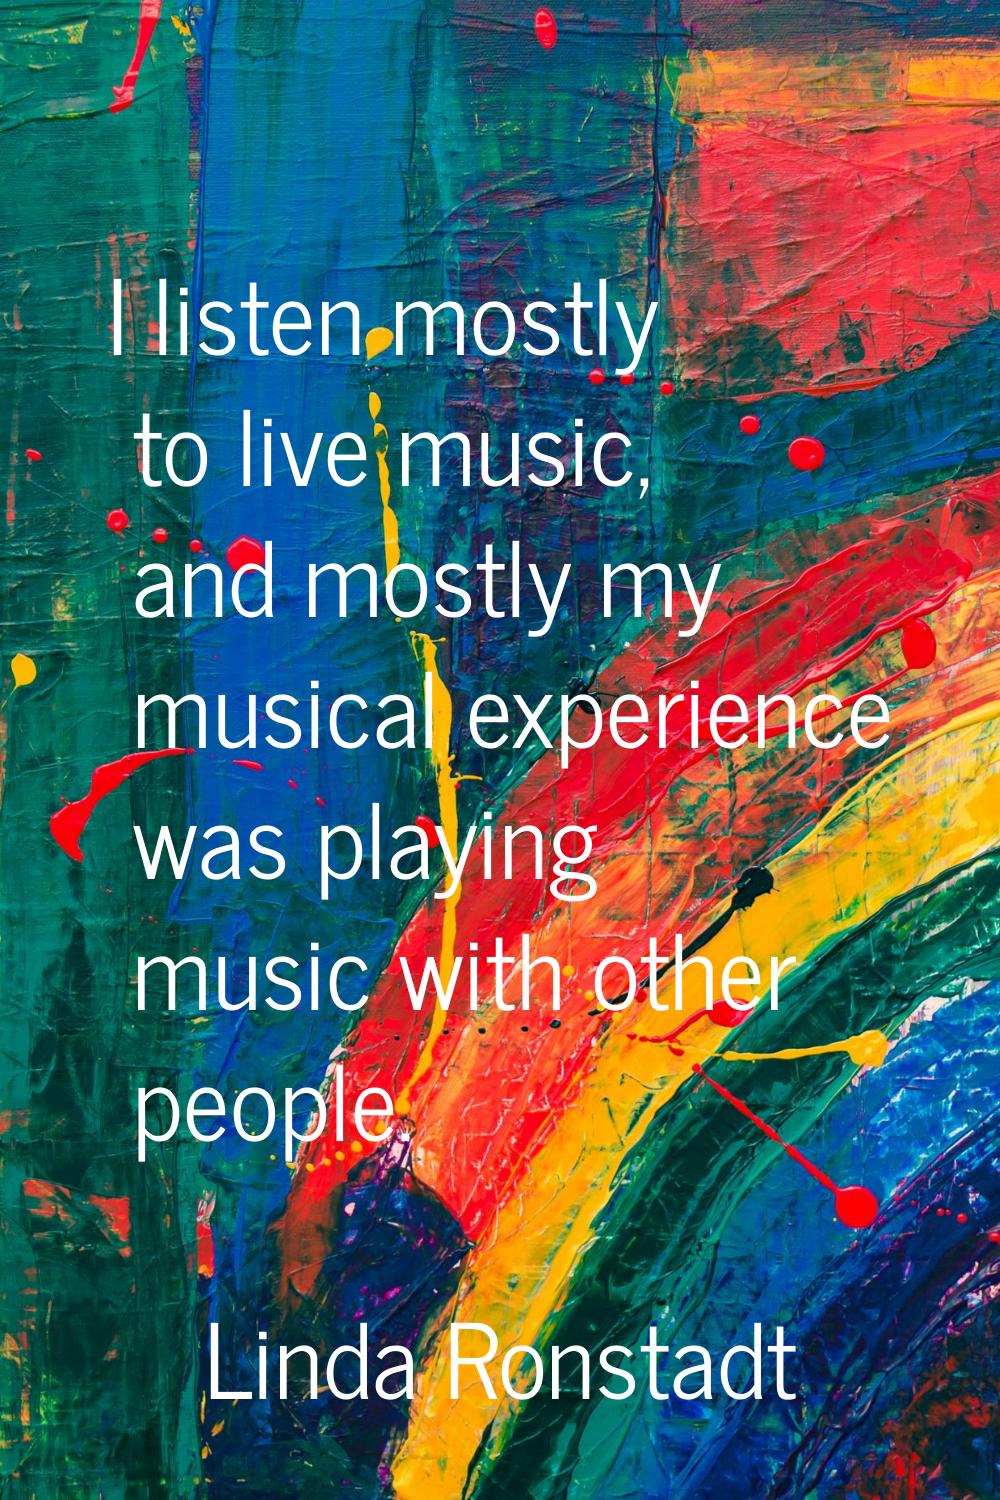 I listen mostly to live music, and mostly my musical experience was playing music with other people